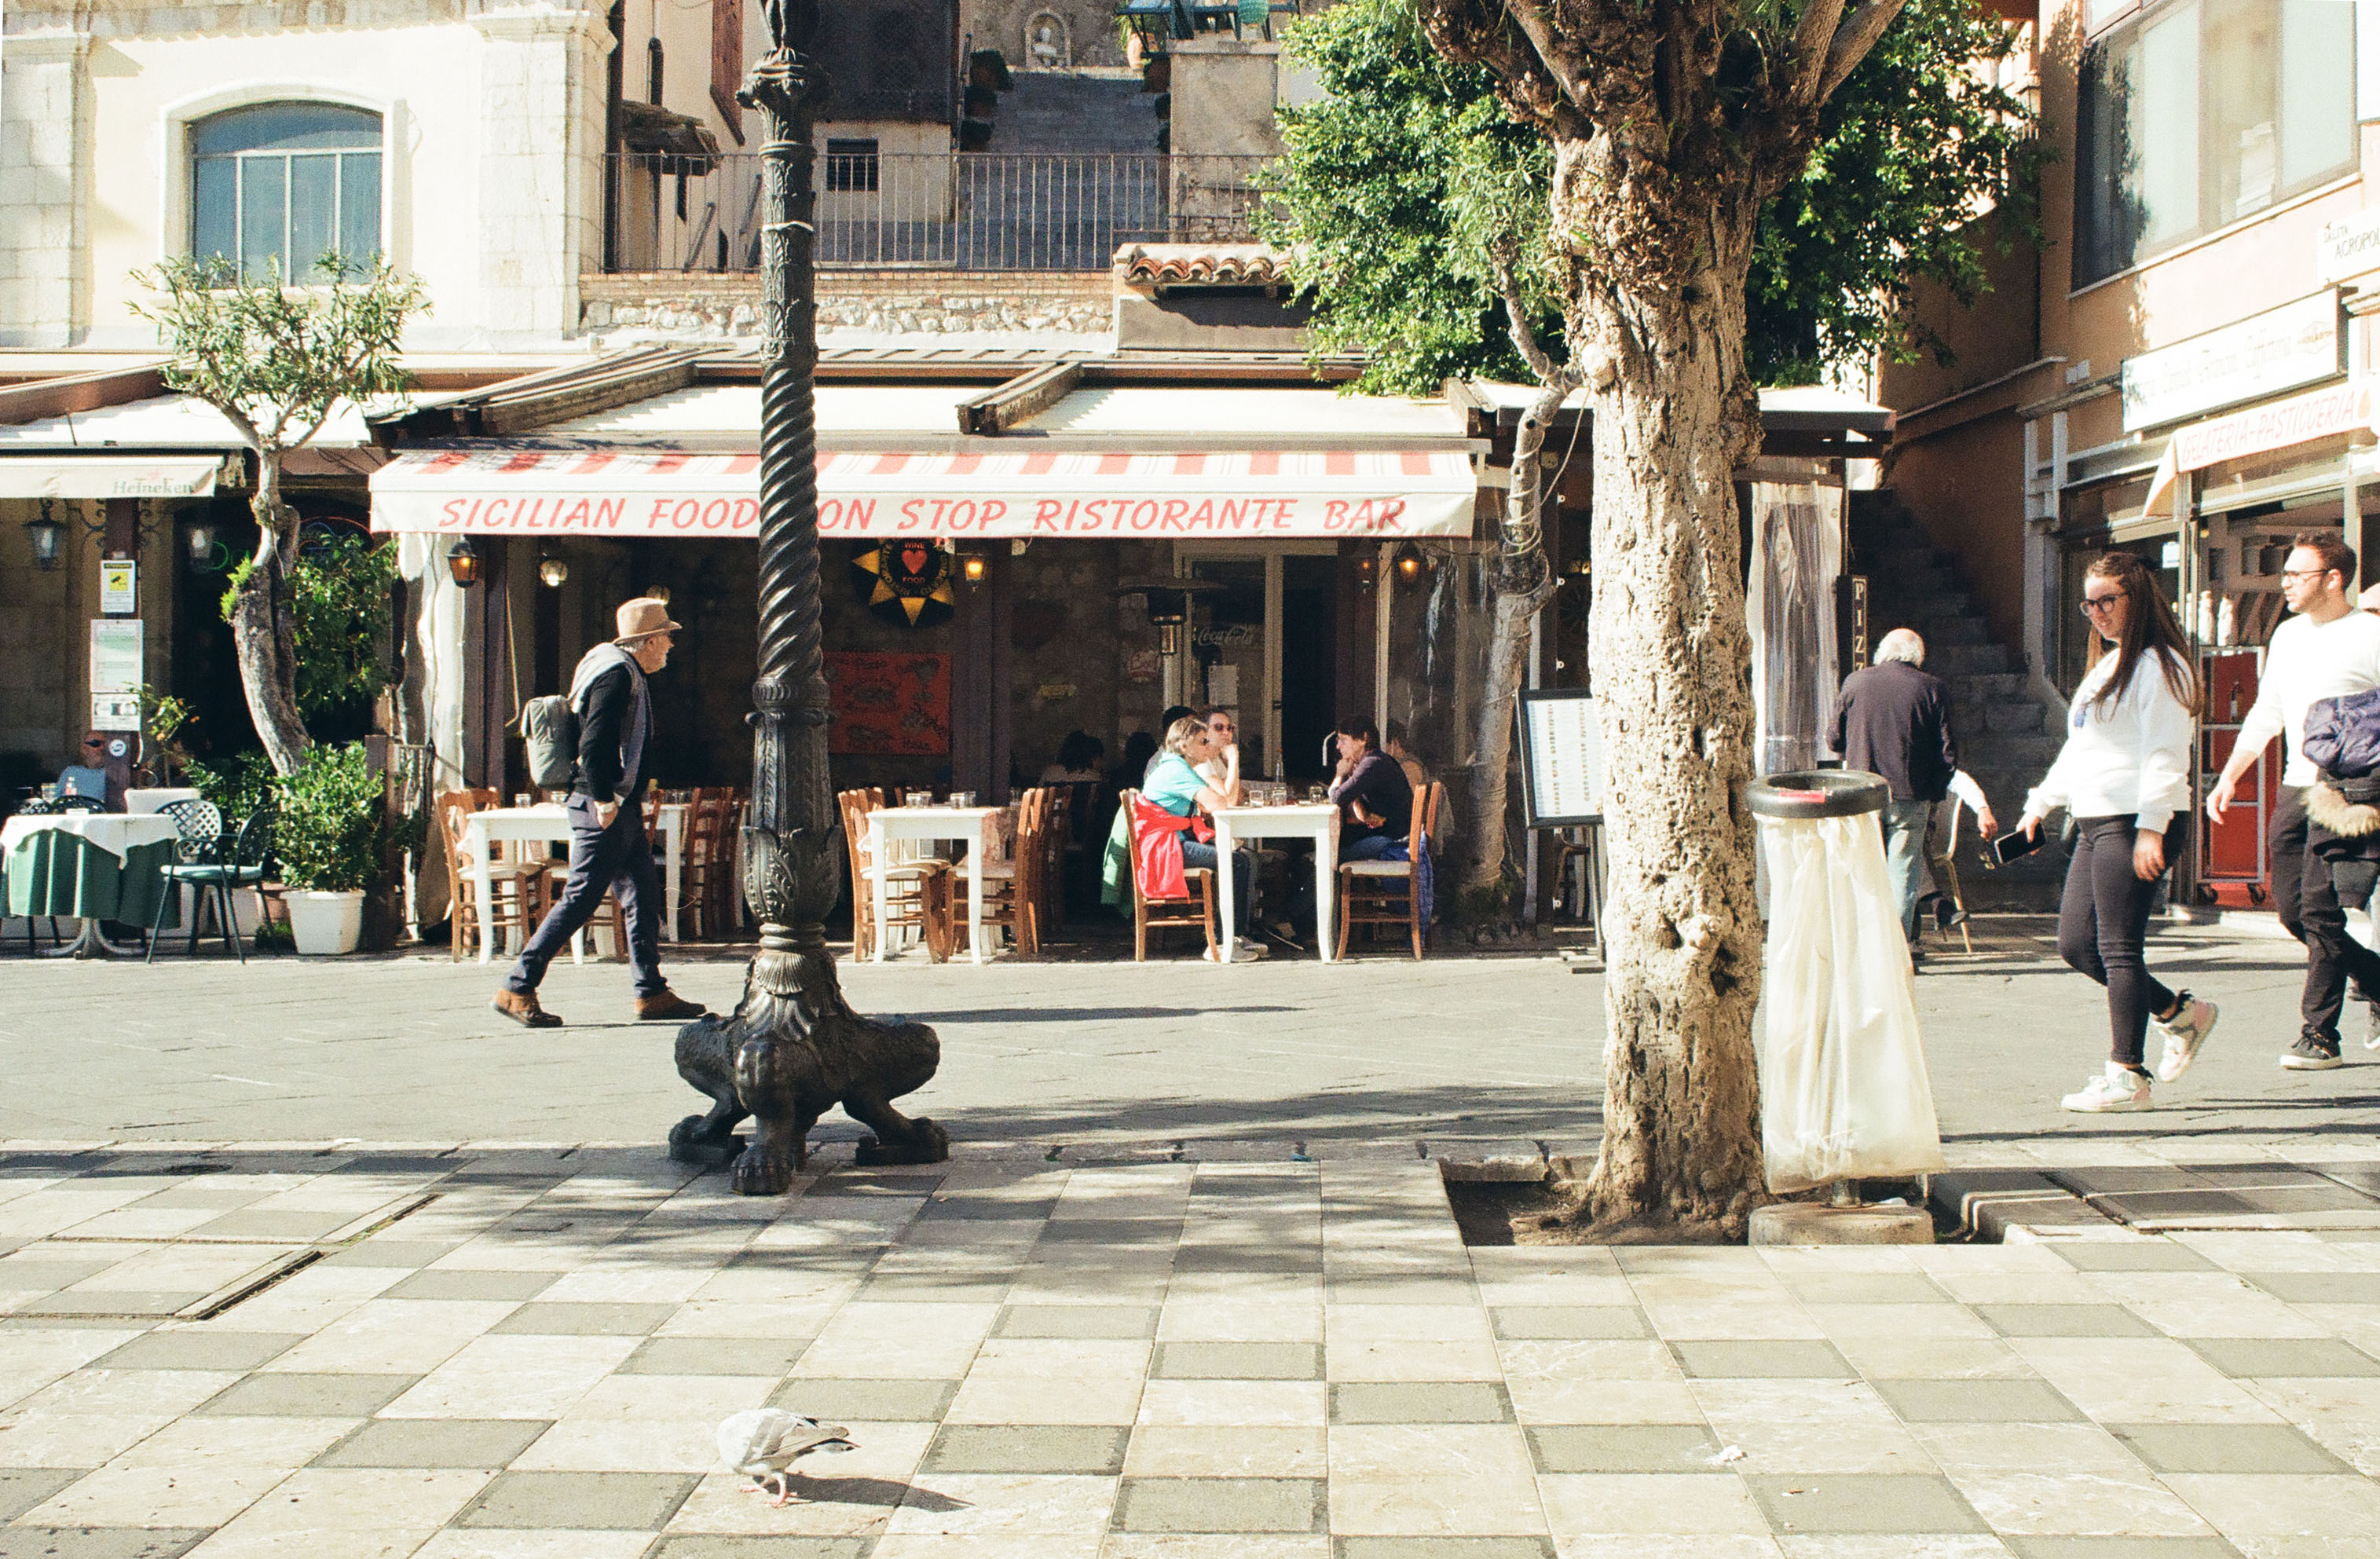 image of a man walking through the square of a town on a sunny day, restaurants and cafes in the background